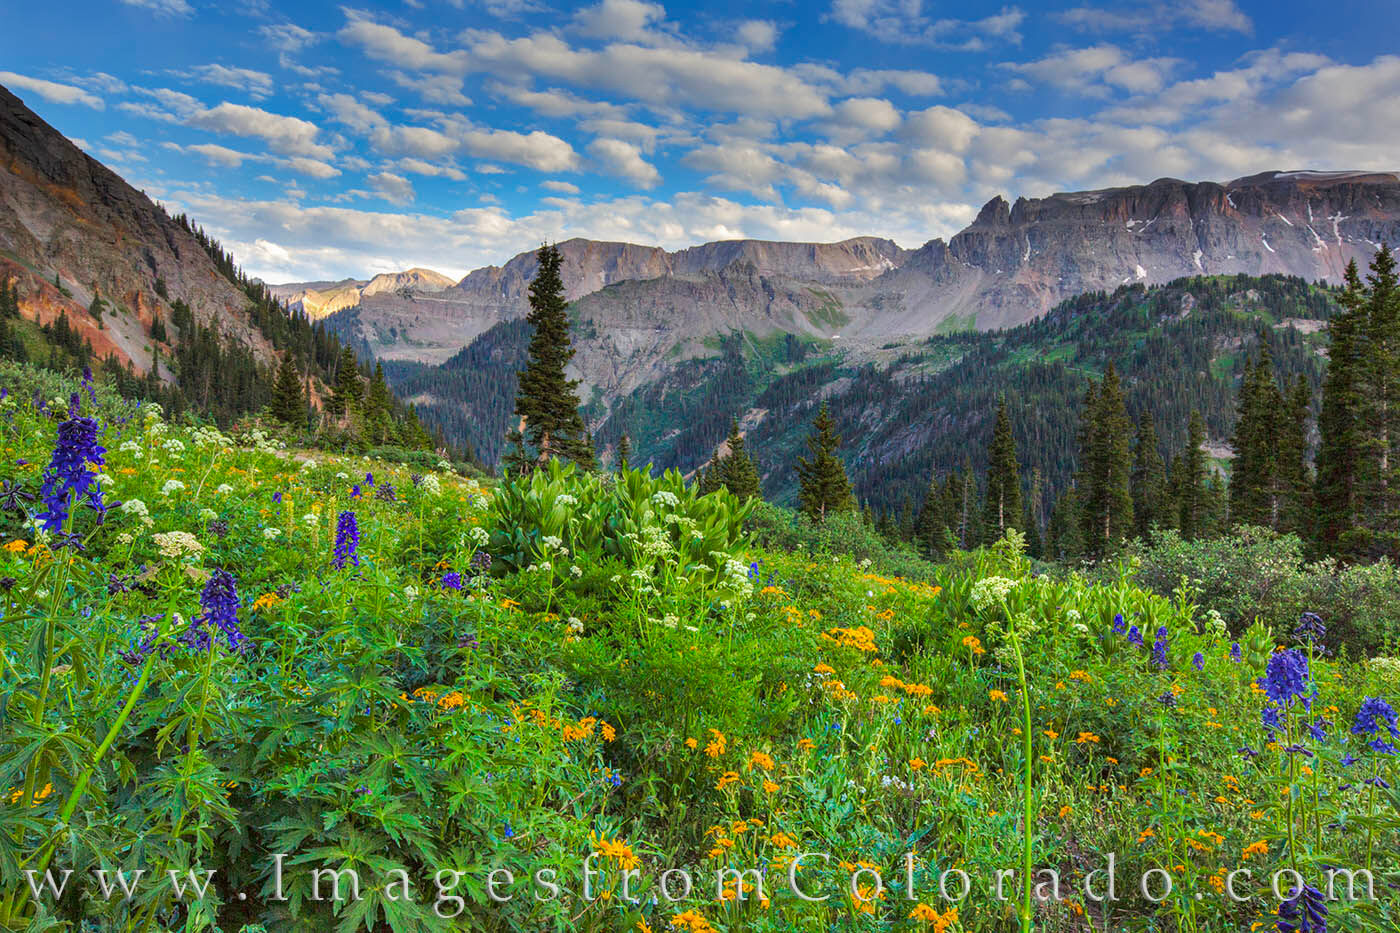 Blue and gold wildflowers colored the grassy slopes of Yankee Boy Basin near Ouray, Colorado, in this summer photograph. After...